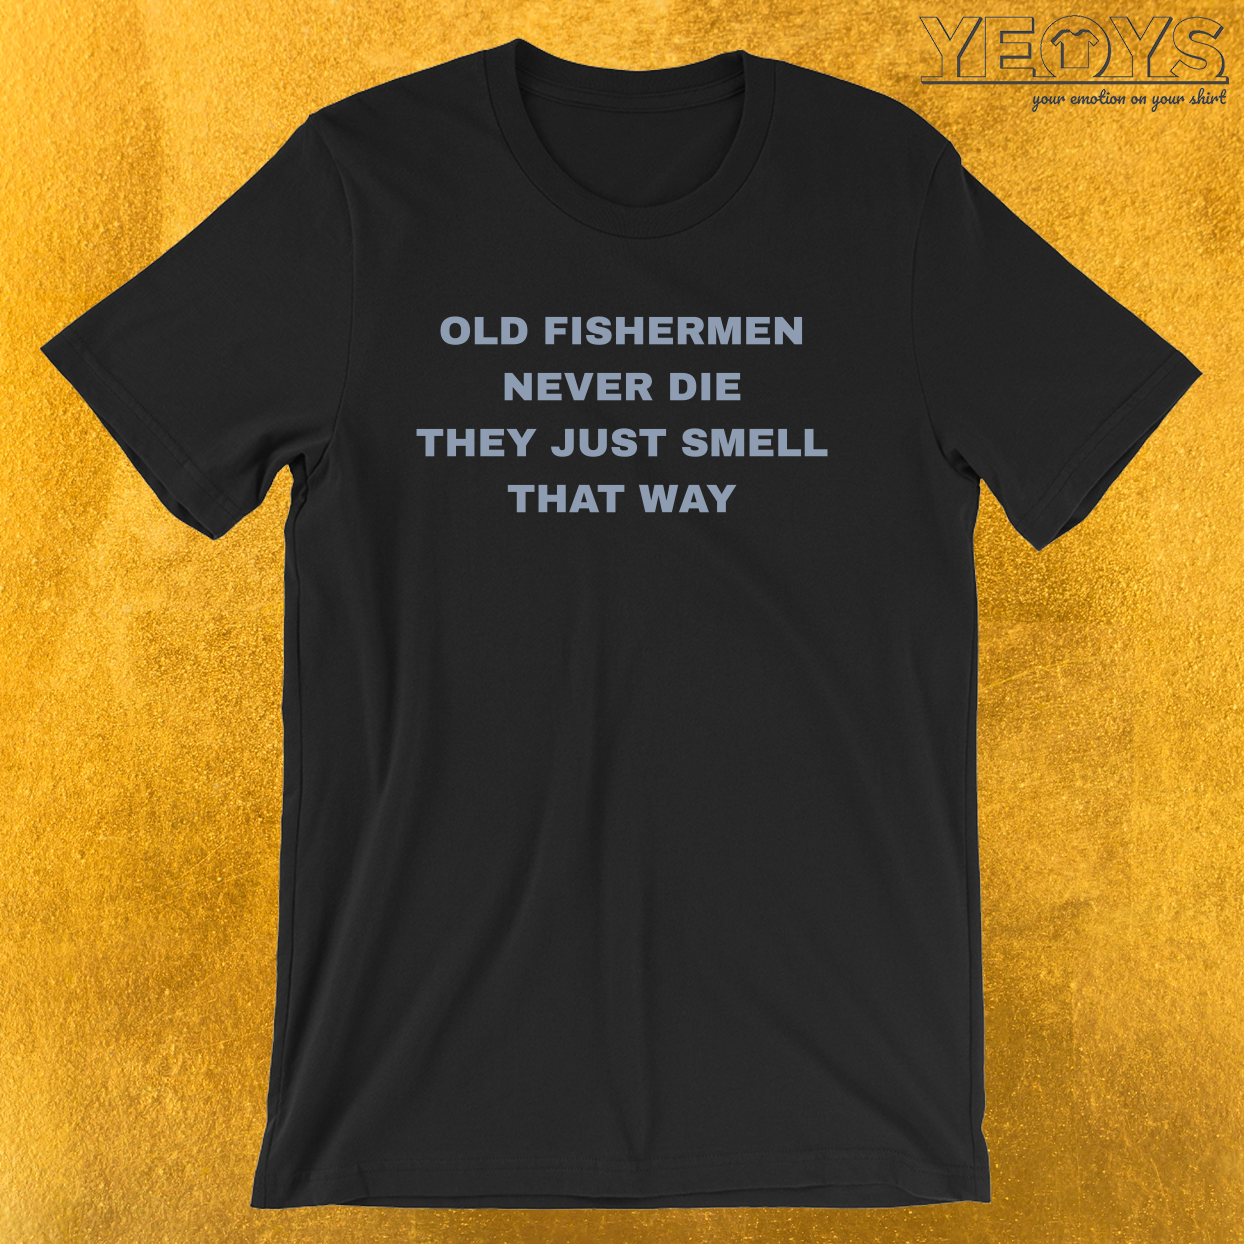 Funny Fishing Quote – Old Fishermen Never Die Tee